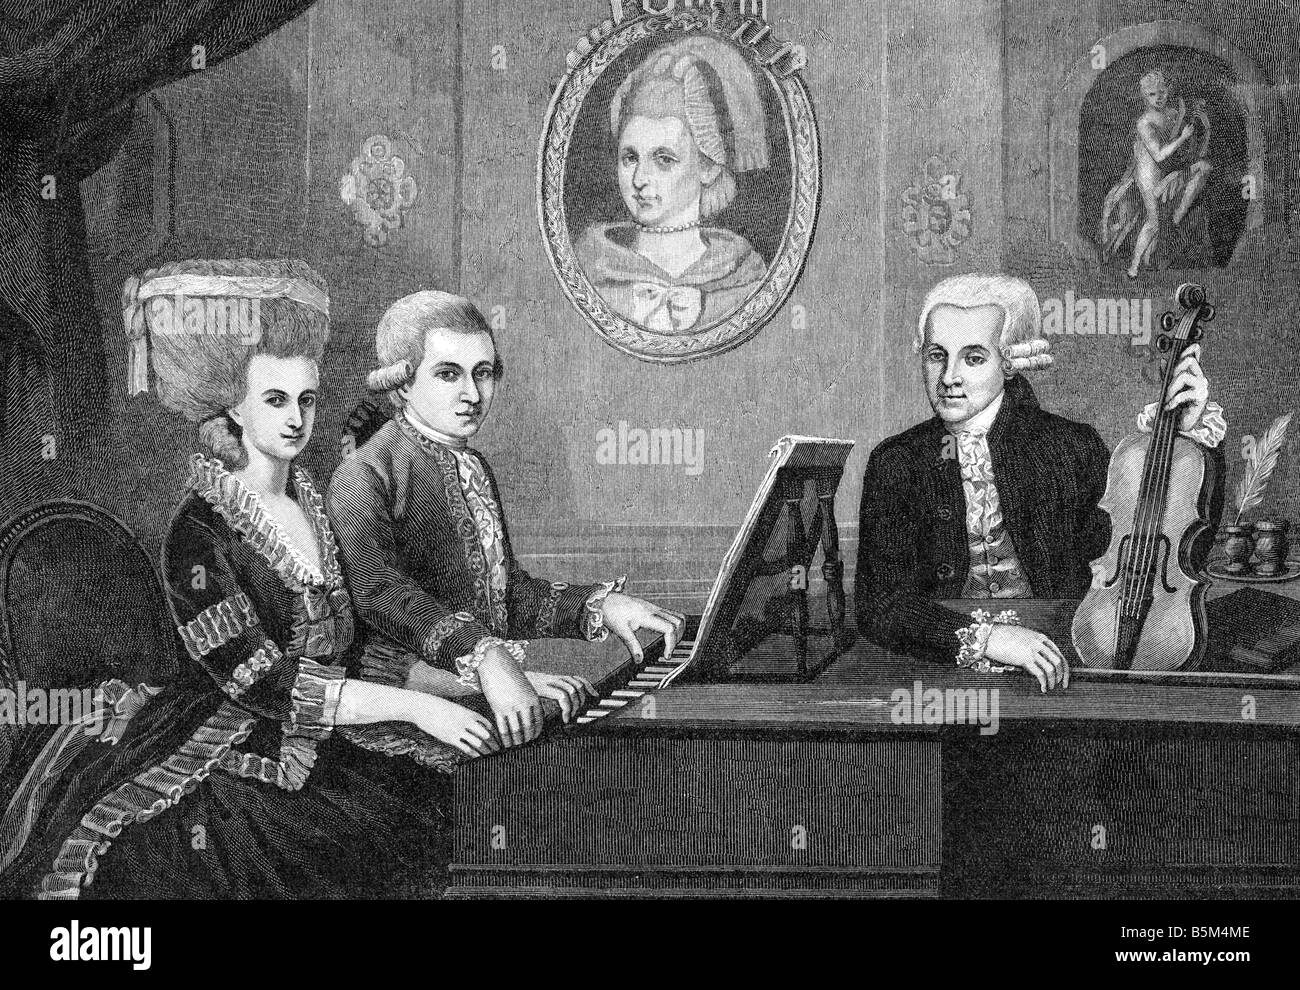 Mozart, Wolfgang Amadeus, 27.1.1756 - 5.12.1791, Austrian musician (composer), half length, with father Leopold and sister Maria Anna, after painting by Della Croce, 1780, wood engraving, 19th century, Stock Photo